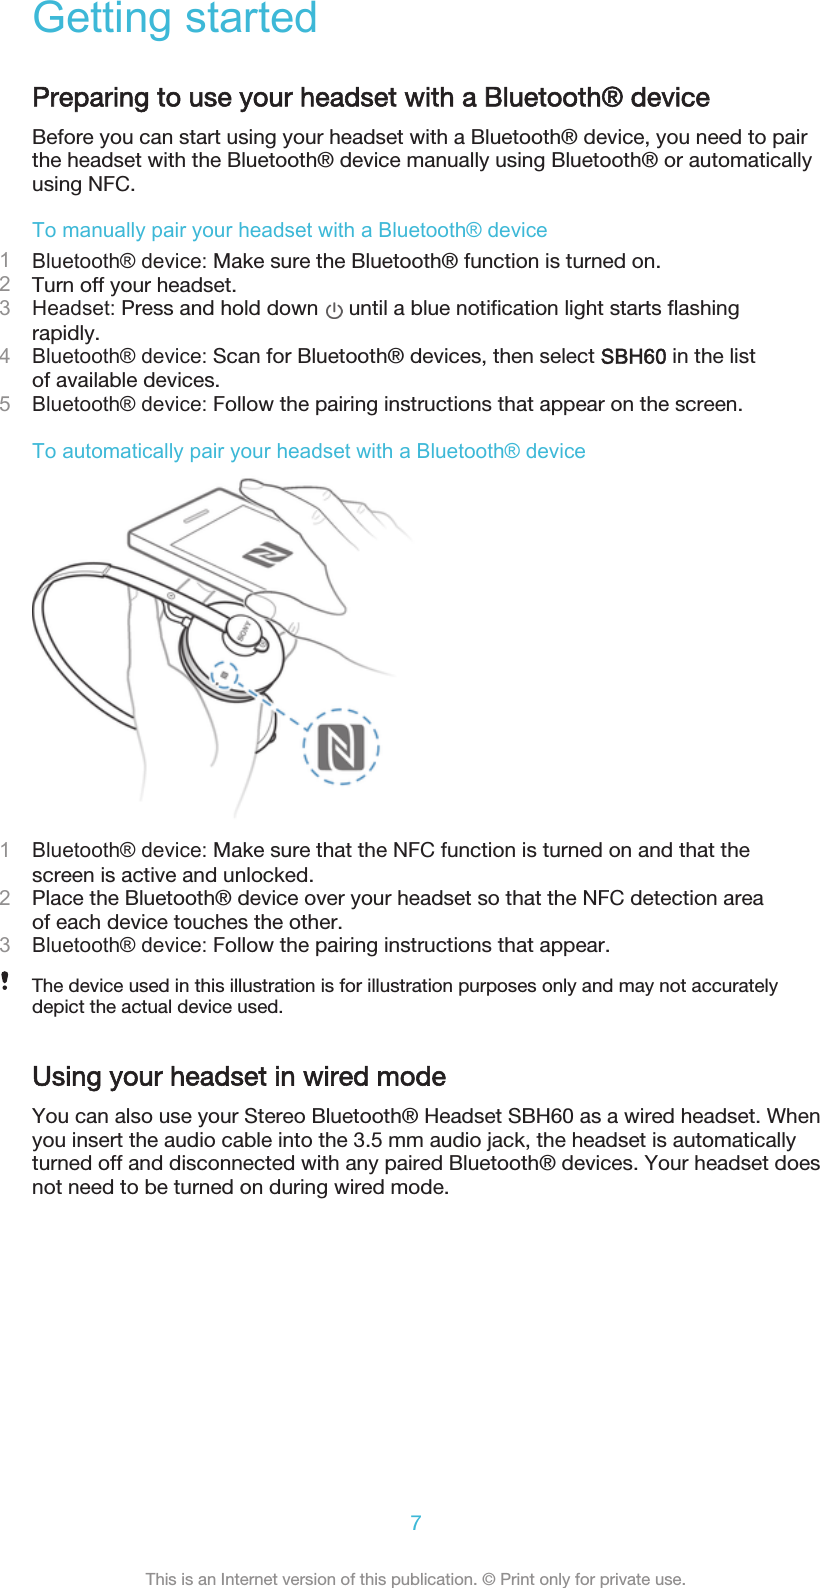 Getting startedPreparing to use your headset with a Bluetooth® deviceBefore you can start using your headset with a Bluetooth® device, you need to pairthe headset with the Bluetooth® device manually using Bluetooth® or automaticallyusing NFC.To manually pair your headset with a Bluetooth® device1Bluetooth® device: Make sure the Bluetooth® function is turned on.2Turn off your headset.3Headset: Press and hold down   until a blue notification light starts flashingrapidly.4Bluetooth® device: Scan for Bluetooth® devices, then select SBH60 in the listof available devices.5Bluetooth® device: Follow the pairing instructions that appear on the screen.To automatically pair your headset with a Bluetooth® device1Bluetooth® device: Make sure that the NFC function is turned on and that thescreen is active and unlocked.2Place the Bluetooth® device over your headset so that the NFC detection areaof each device touches the other.3Bluetooth® device: Follow the pairing instructions that appear.The device used in this illustration is for illustration purposes only and may not accuratelydepict the actual device used.Using your headset in wired modeYou can also use your Stereo Bluetooth® Headset SBH60 as a wired headset. Whenyou insert the audio cable into the 3.5 mm audio jack, the headset is automaticallyturned off and disconnected with any paired Bluetooth® devices. Your headset doesnot need to be turned on during wired mode.7This is an Internet version of this publication. © Print only for private use.